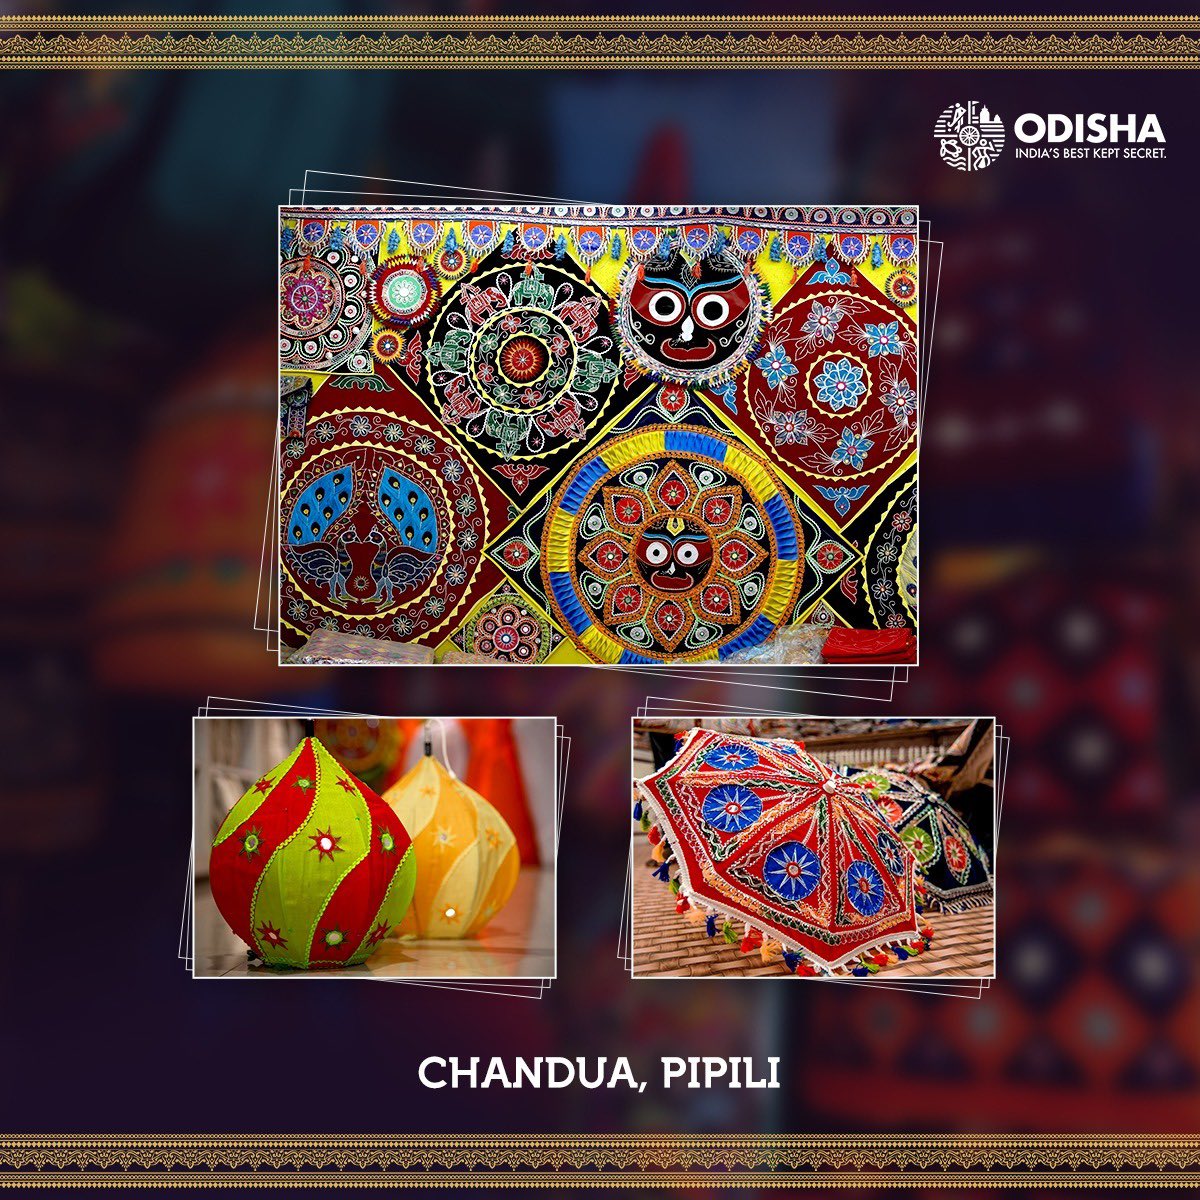 'Chandua', a beautiful applique artform believed to have started in 17th century, finds its origin in a quaint village of Pipili in Puri. From umbrellas to cushion covers and wall hangings to canopies, add a fine Chandua craft to elevate your home decor. Check out some